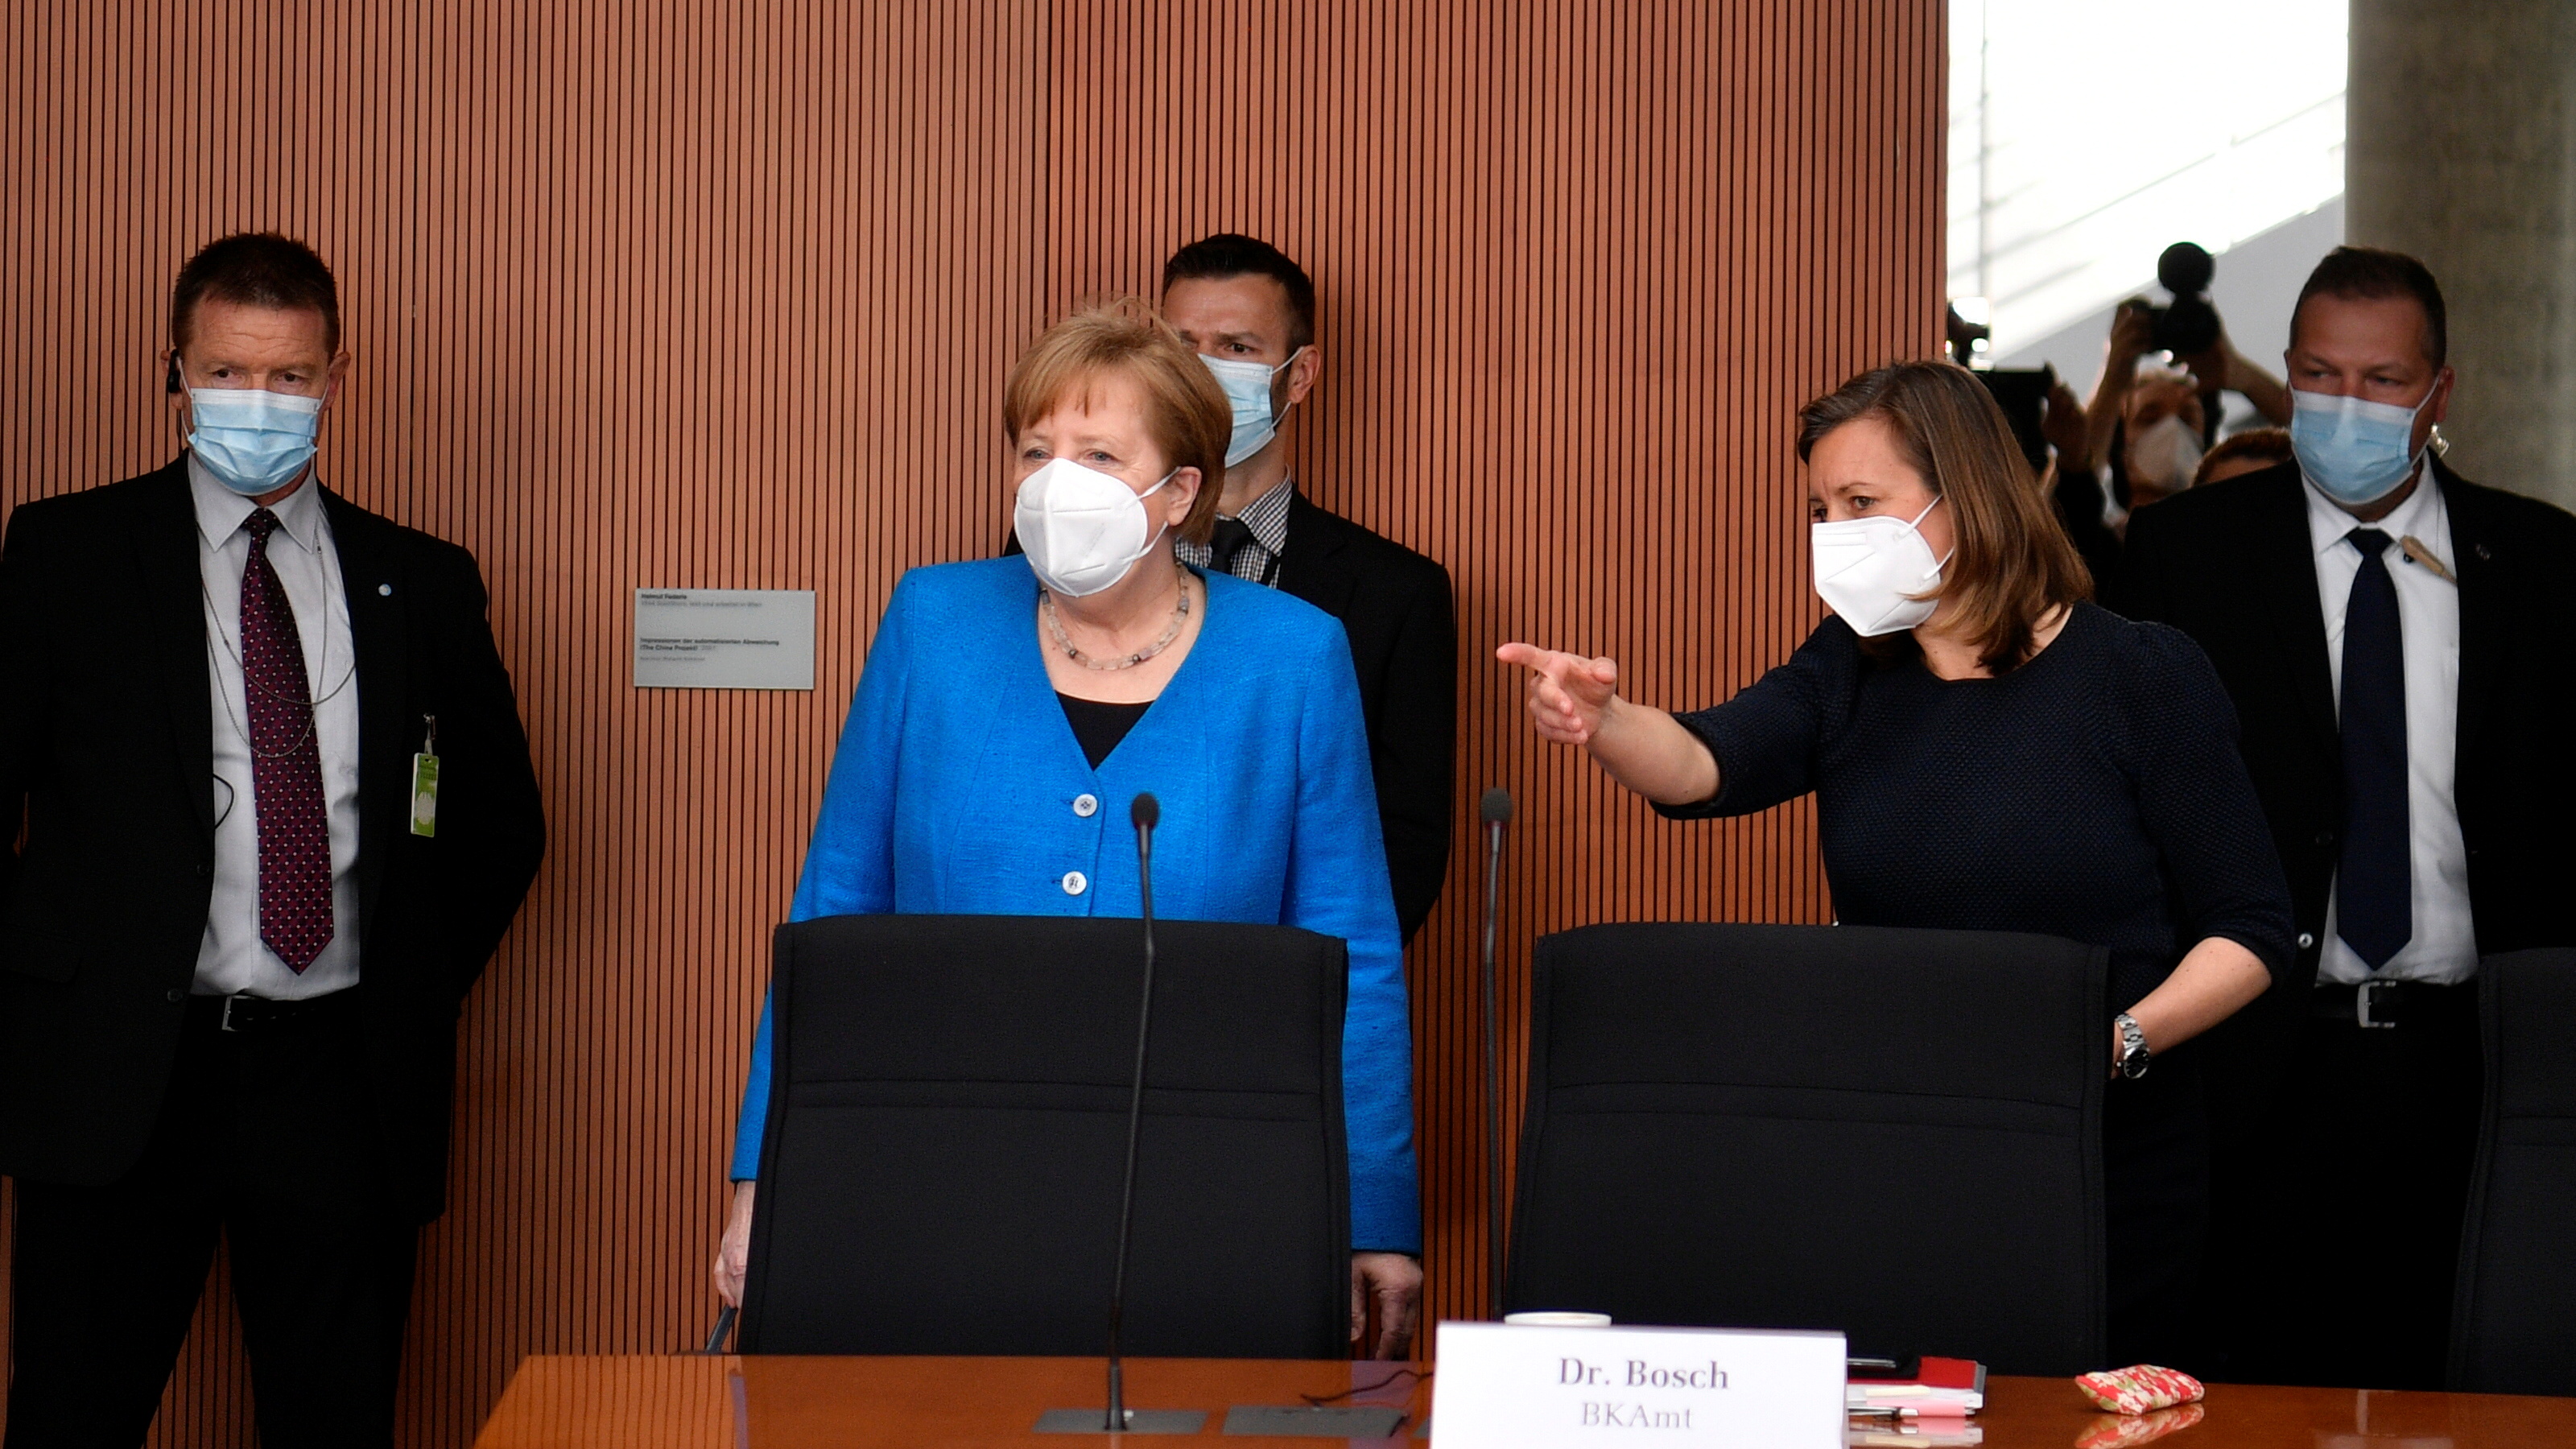 German Chancellor Angela Merkel arrives to testify in front of a parliamentary committee investigating the financial scandal over payment systems provider Wirecard in Berlin, Germany April 23, 2021. John MacDougall/Pool via REUTERS